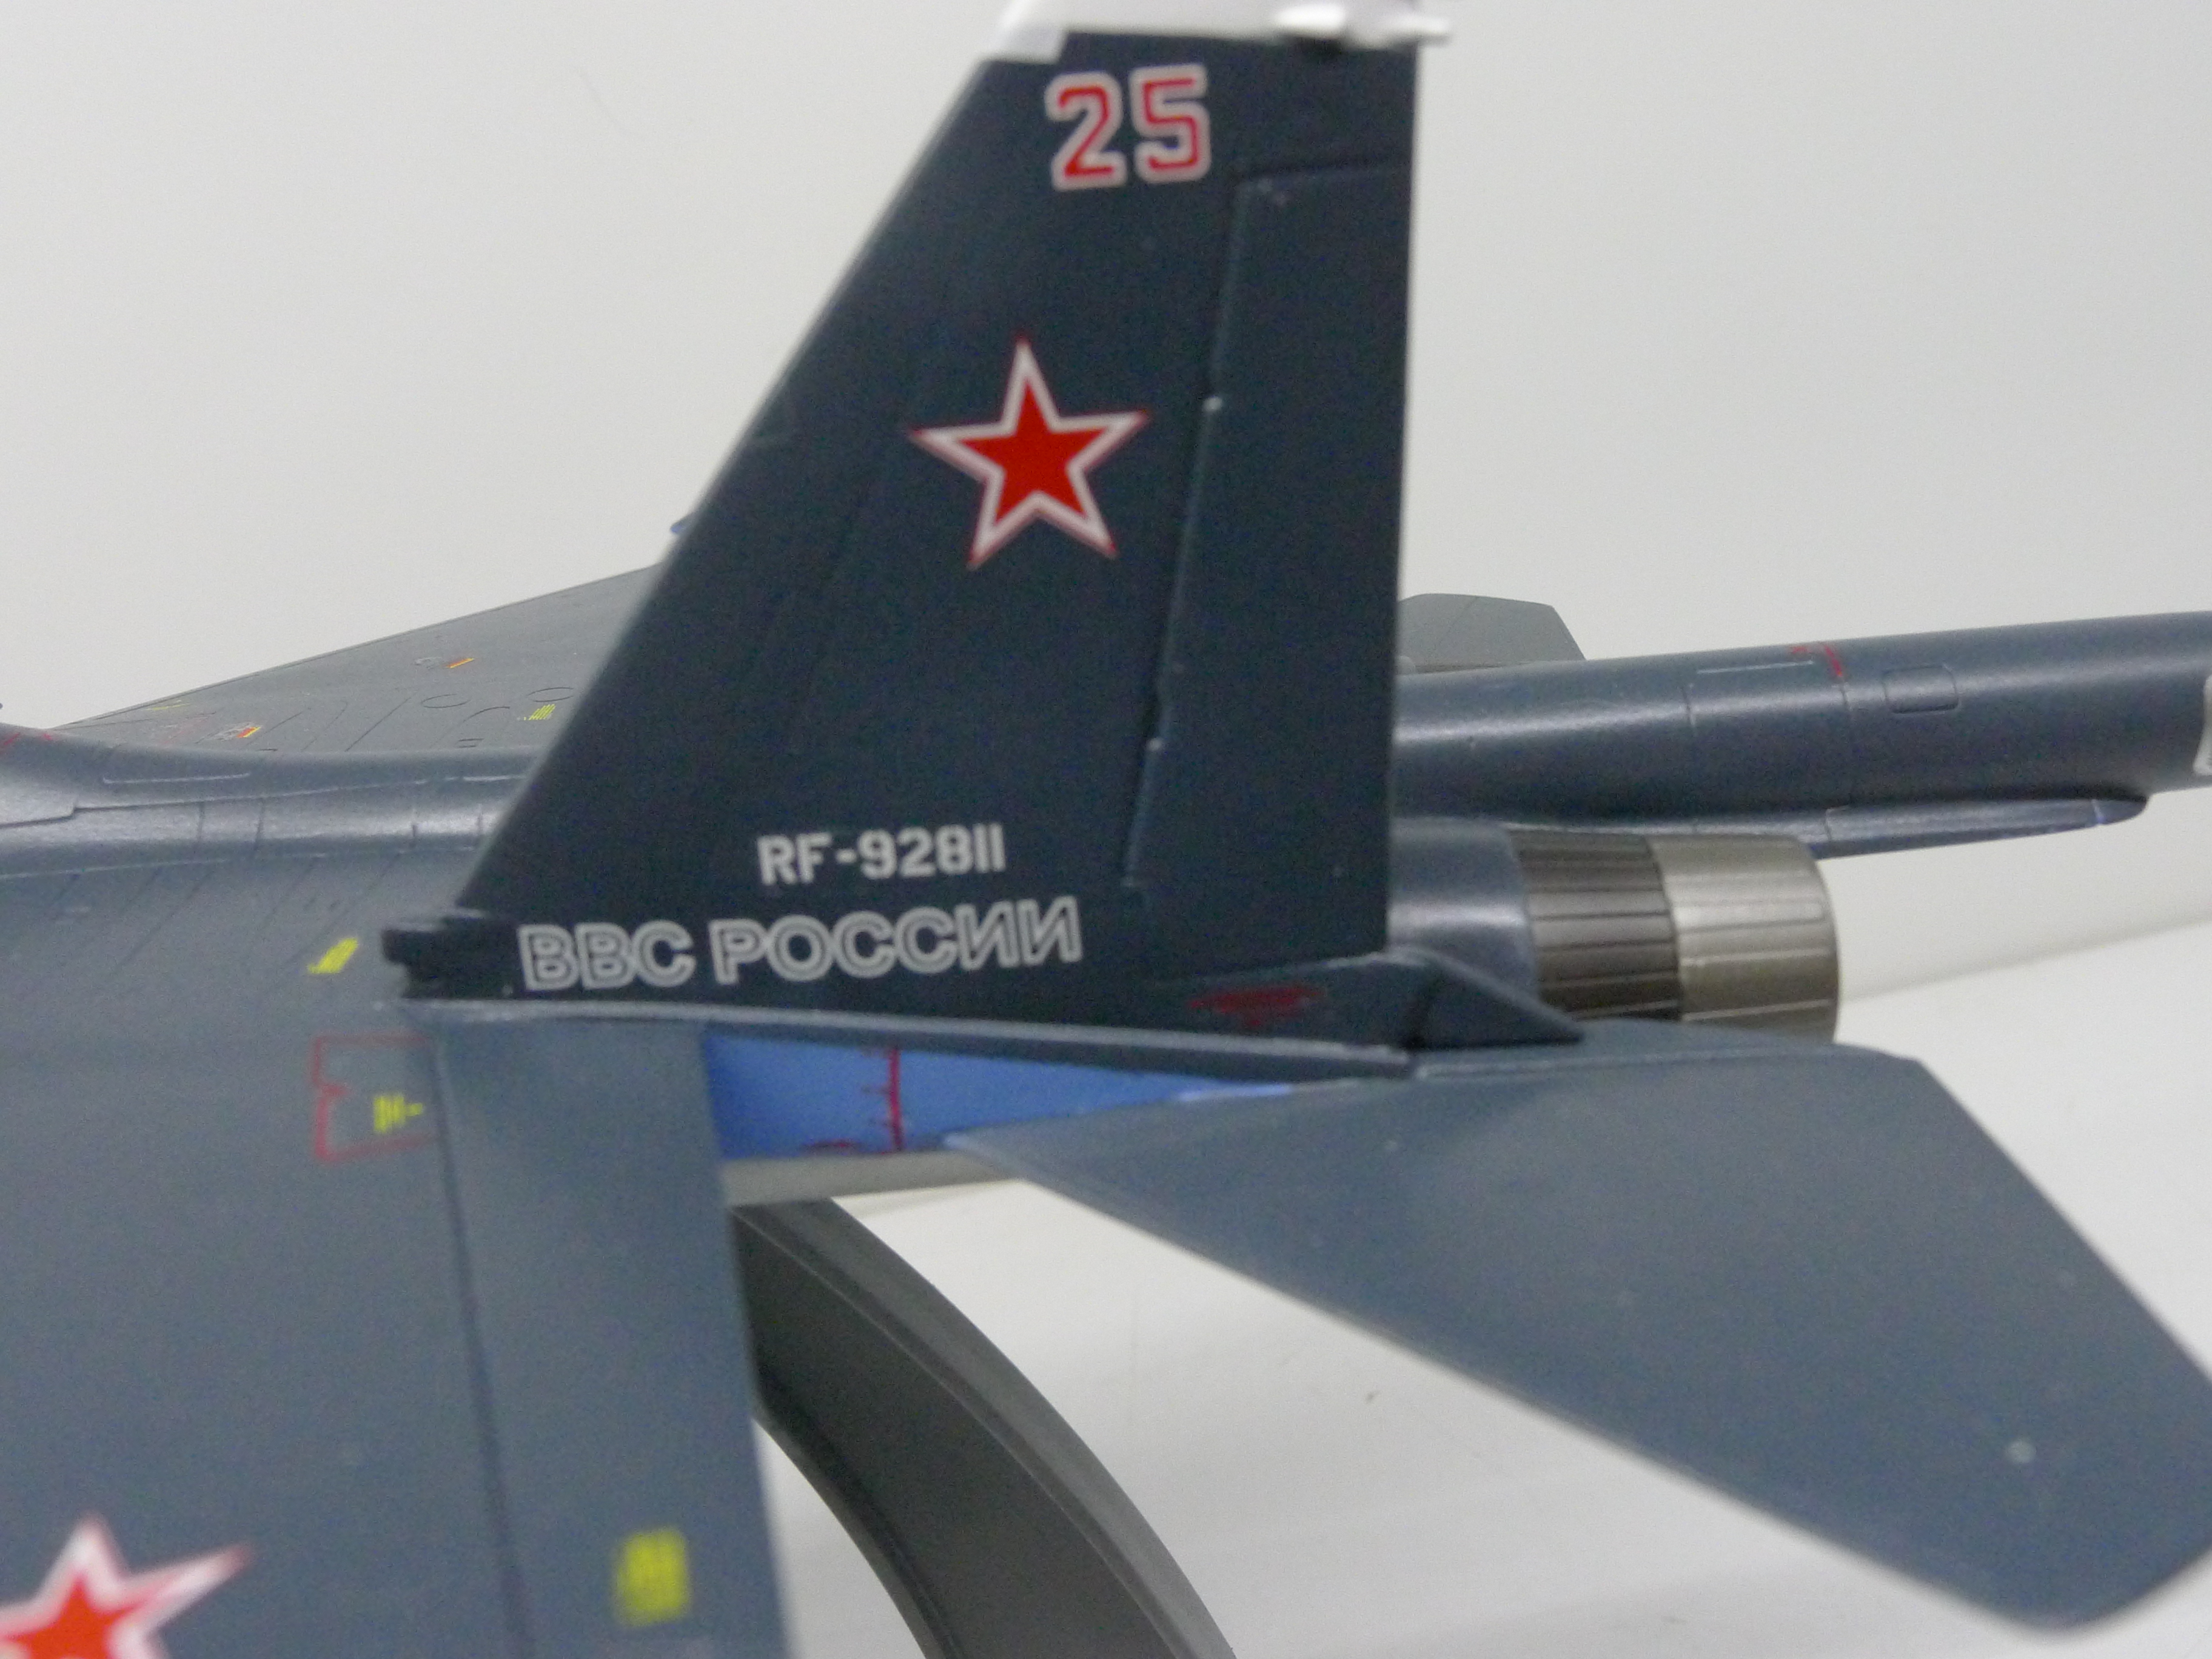        -34  1:72,   28 . ,  .  Model Russian front-line aircraft, the Su-34. Scale 1:72, hand made. # 5 hobbyplus.ru